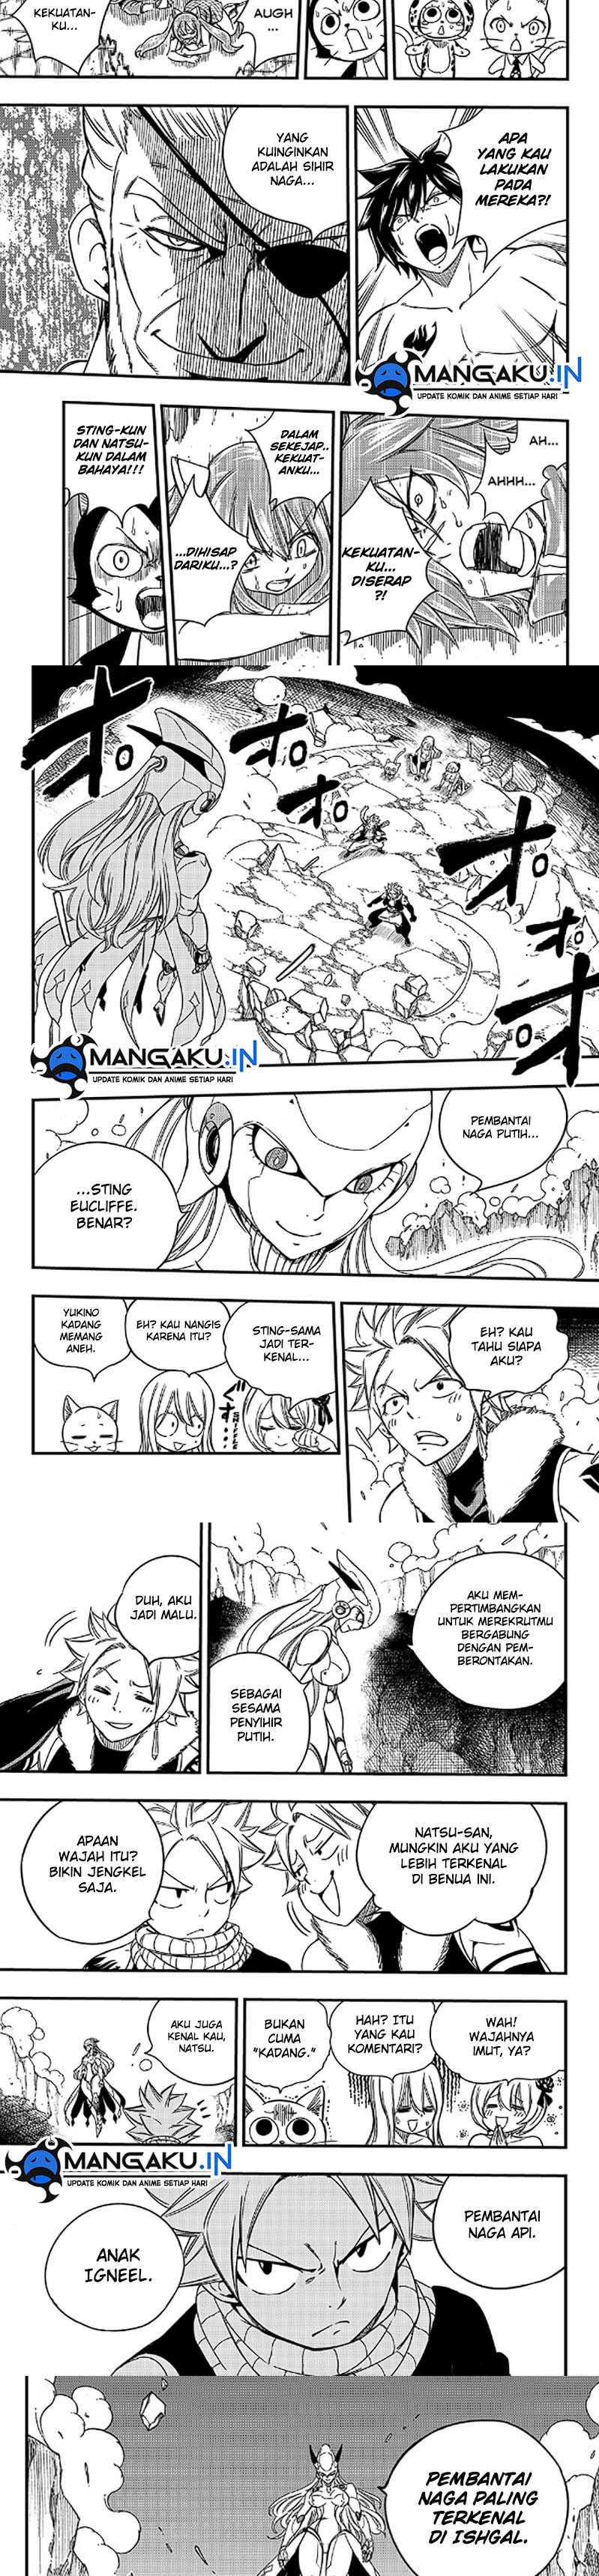 Fairy Tail: 100 Years Quest Chapter 133